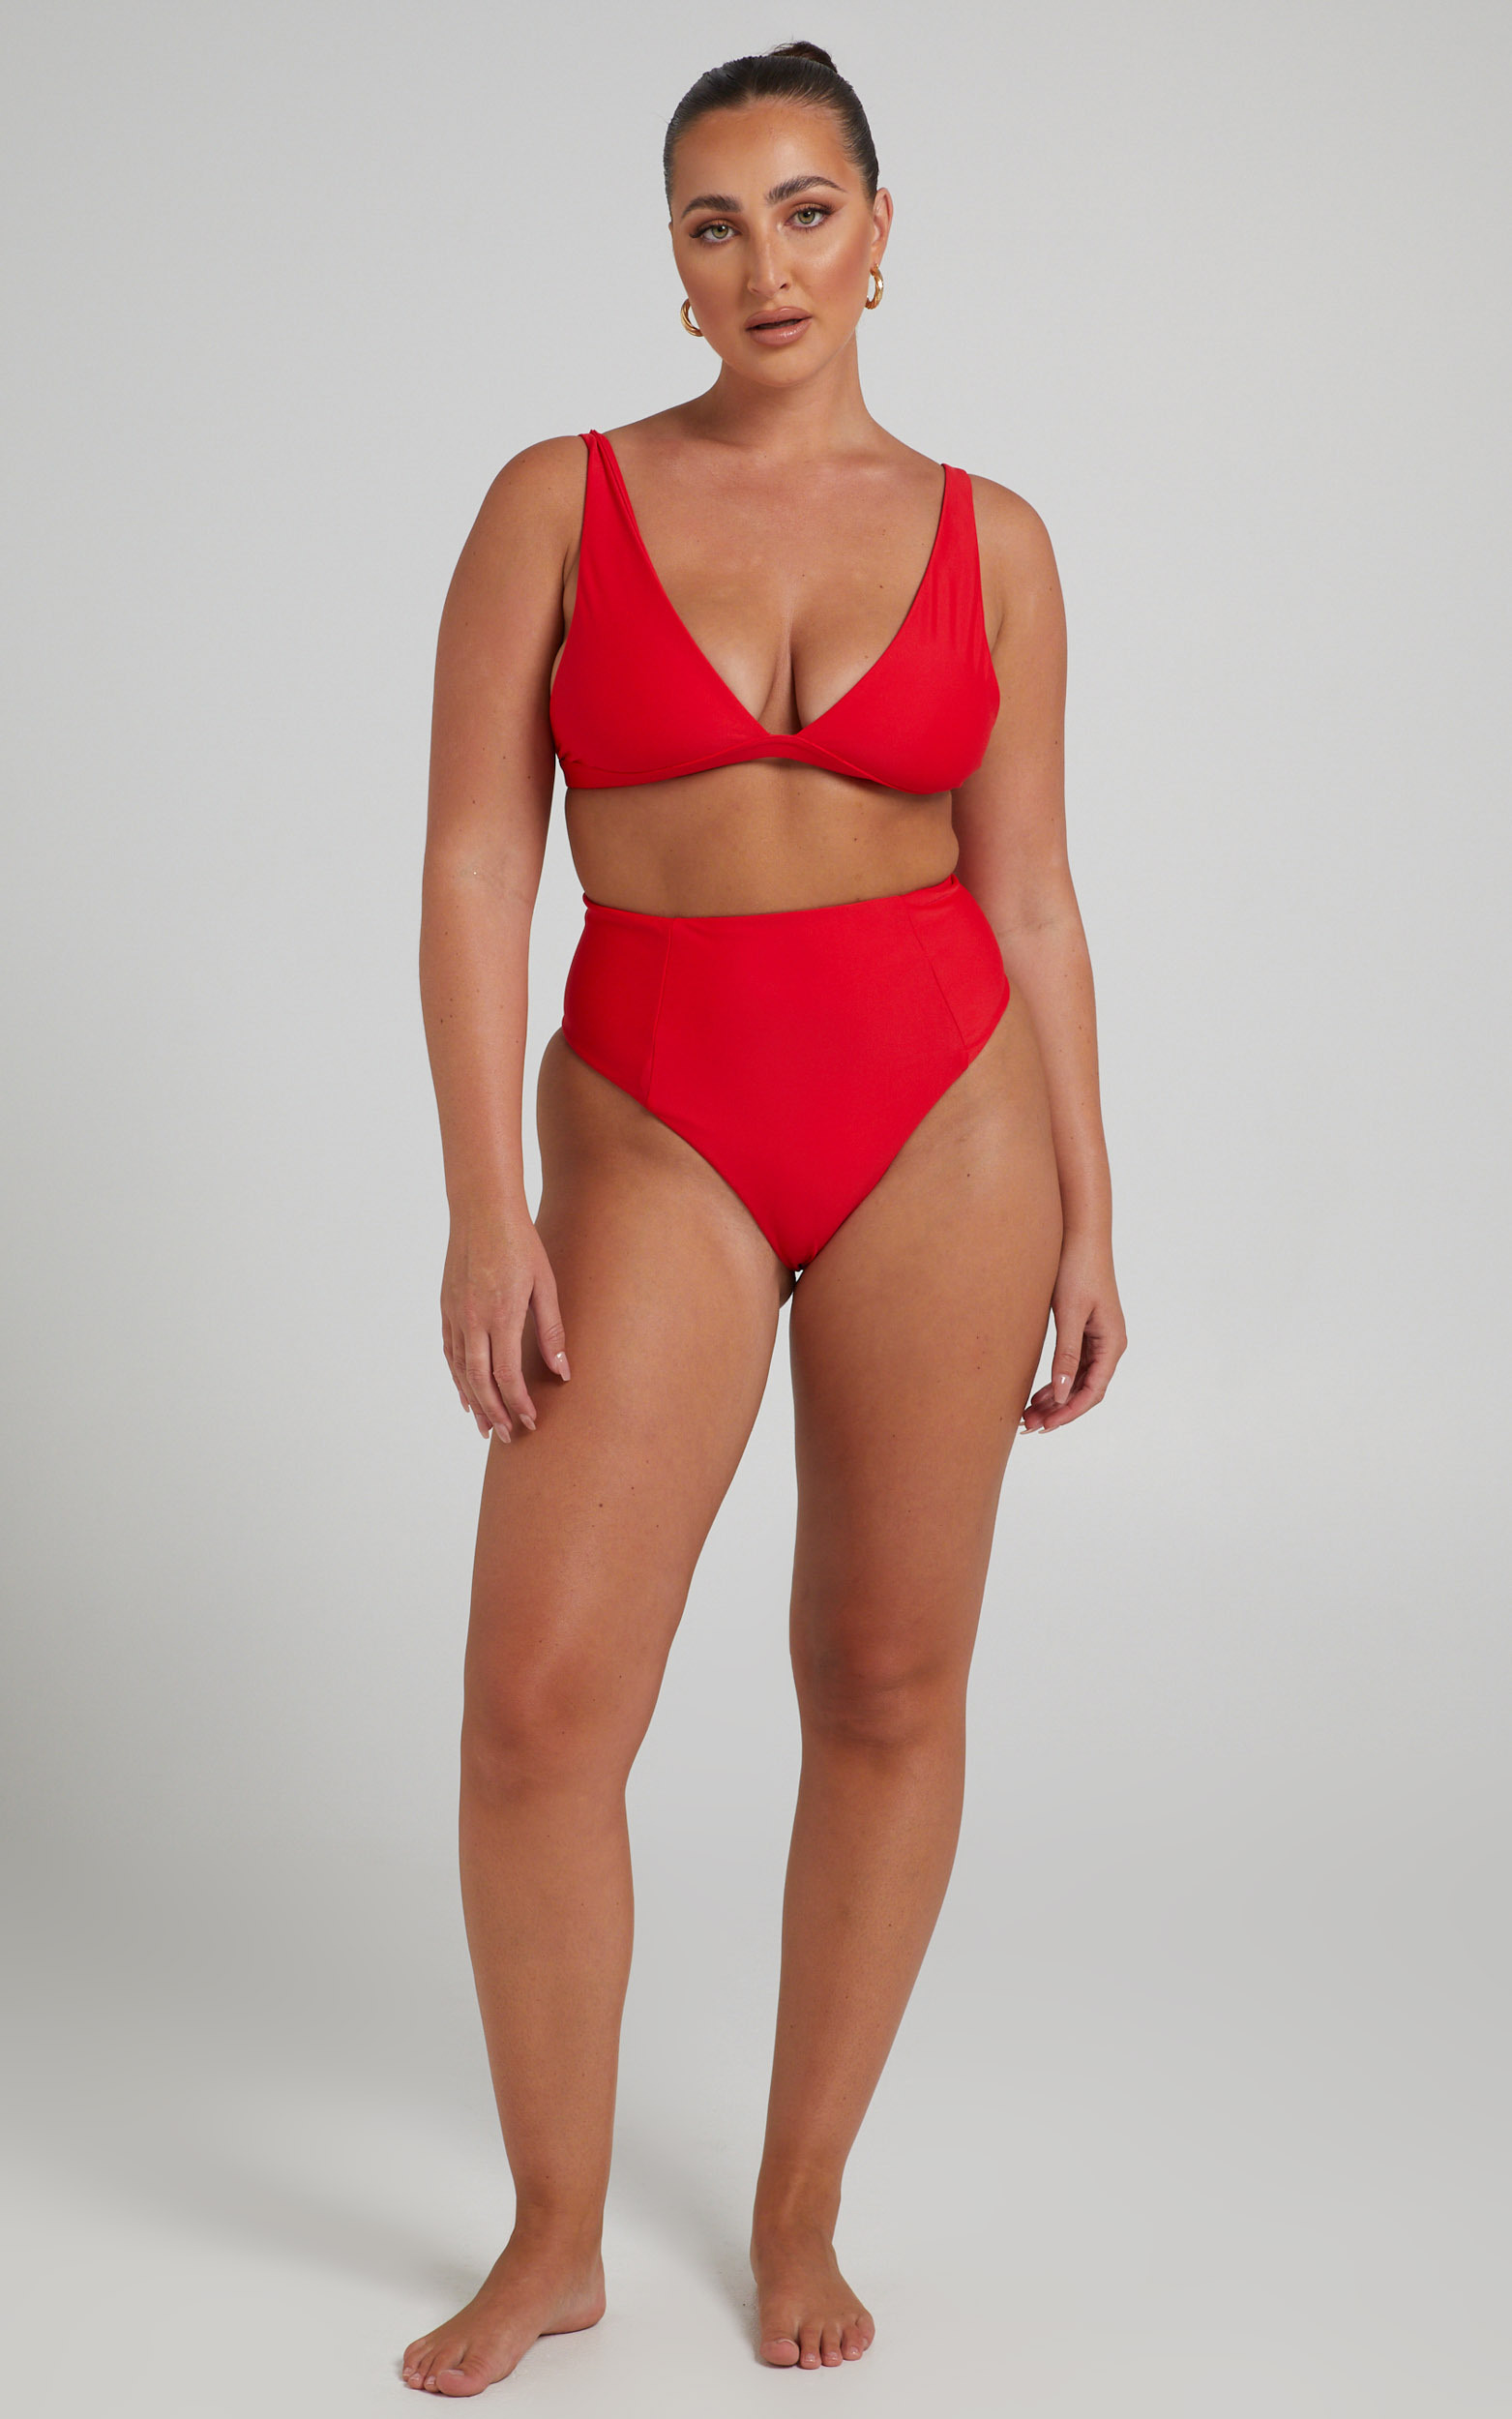 Coventina Triangle Bikini Top in Red - 04, RED2, hi-res image number null